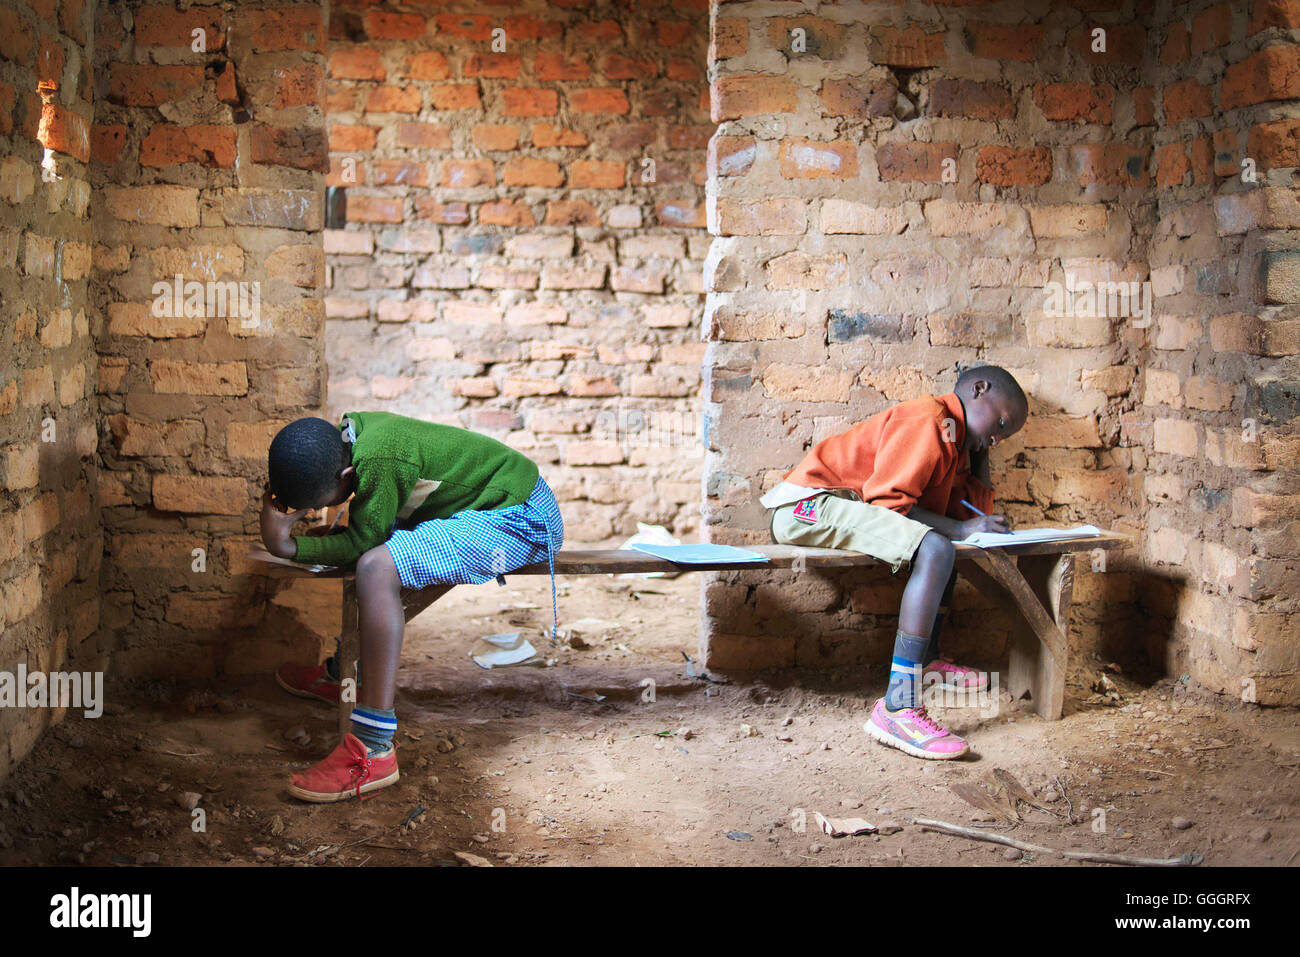 Two african school children in a rural school in Uganda/Rwanda take a school test, sitting opposite each other on wooden benches Stock Photo